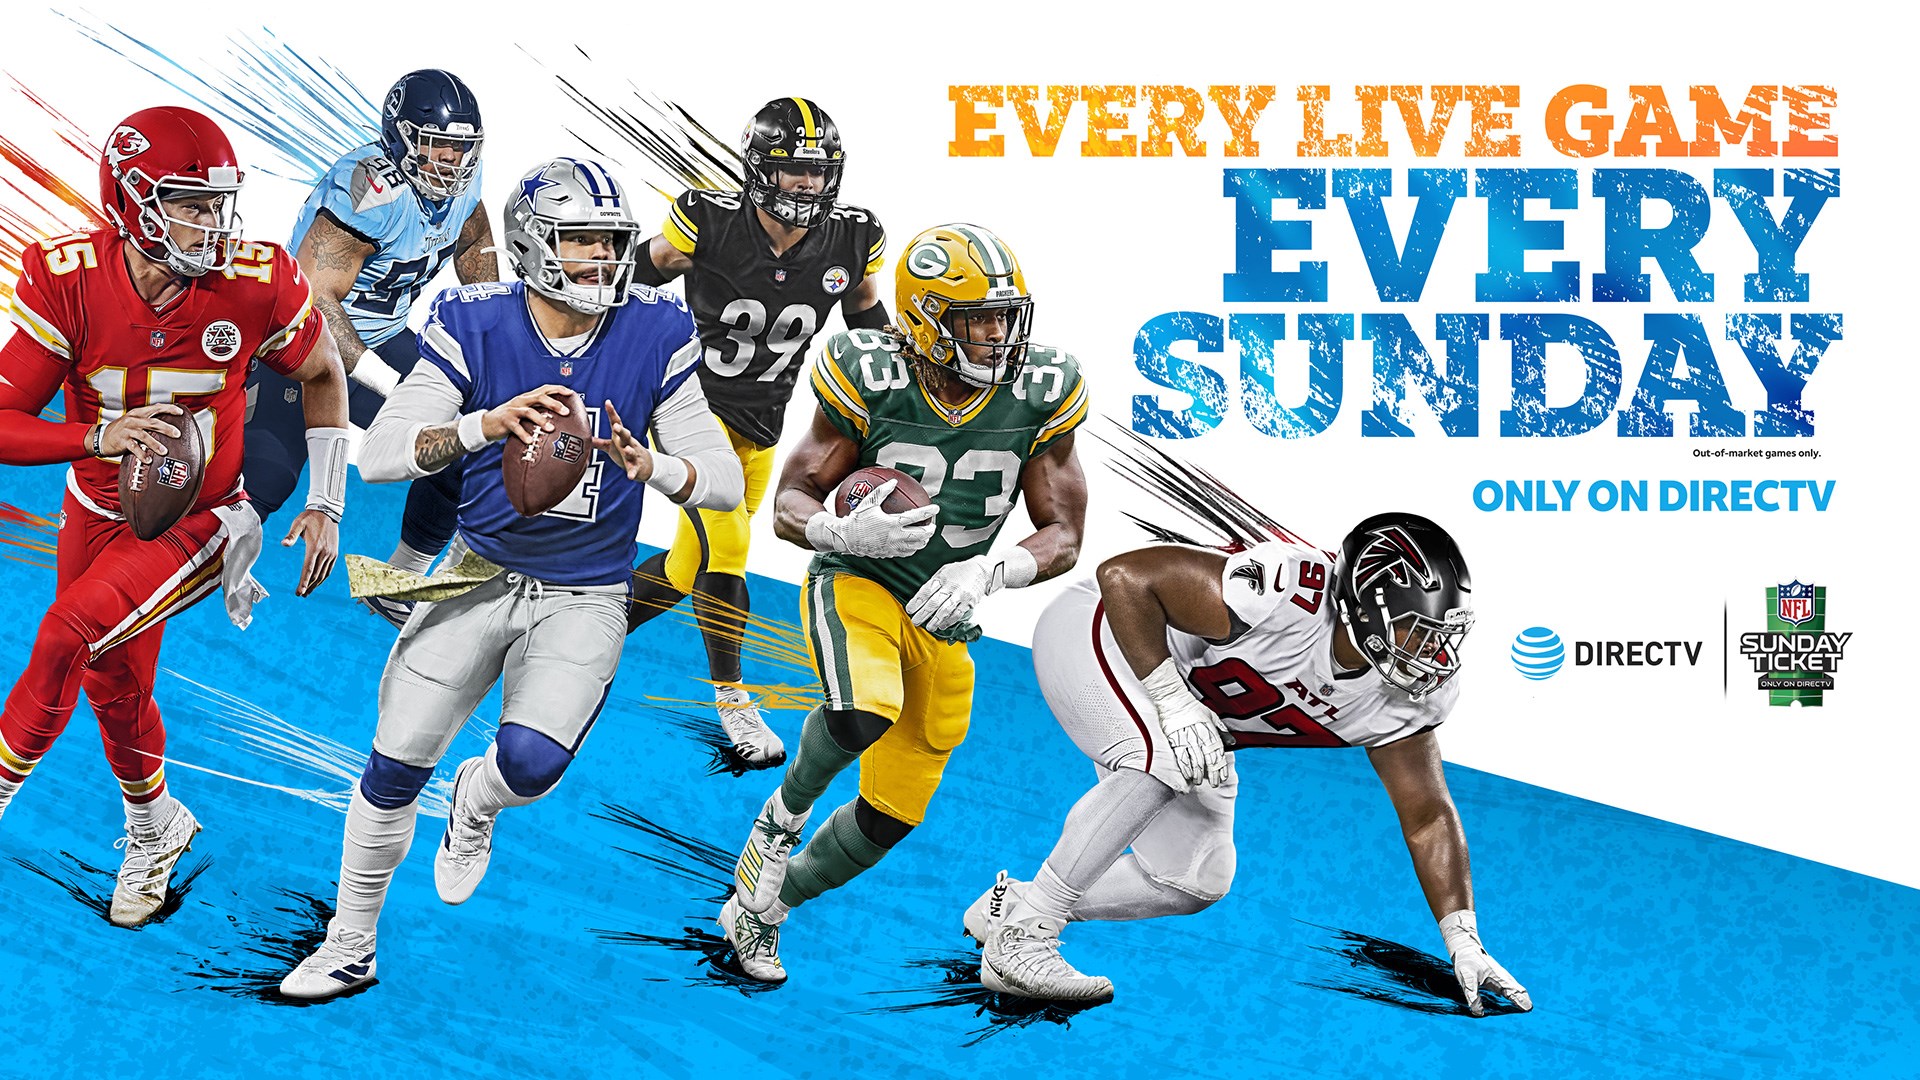 Why Doesn't The NFL Just Stream Sunday Ticket On Its Own?